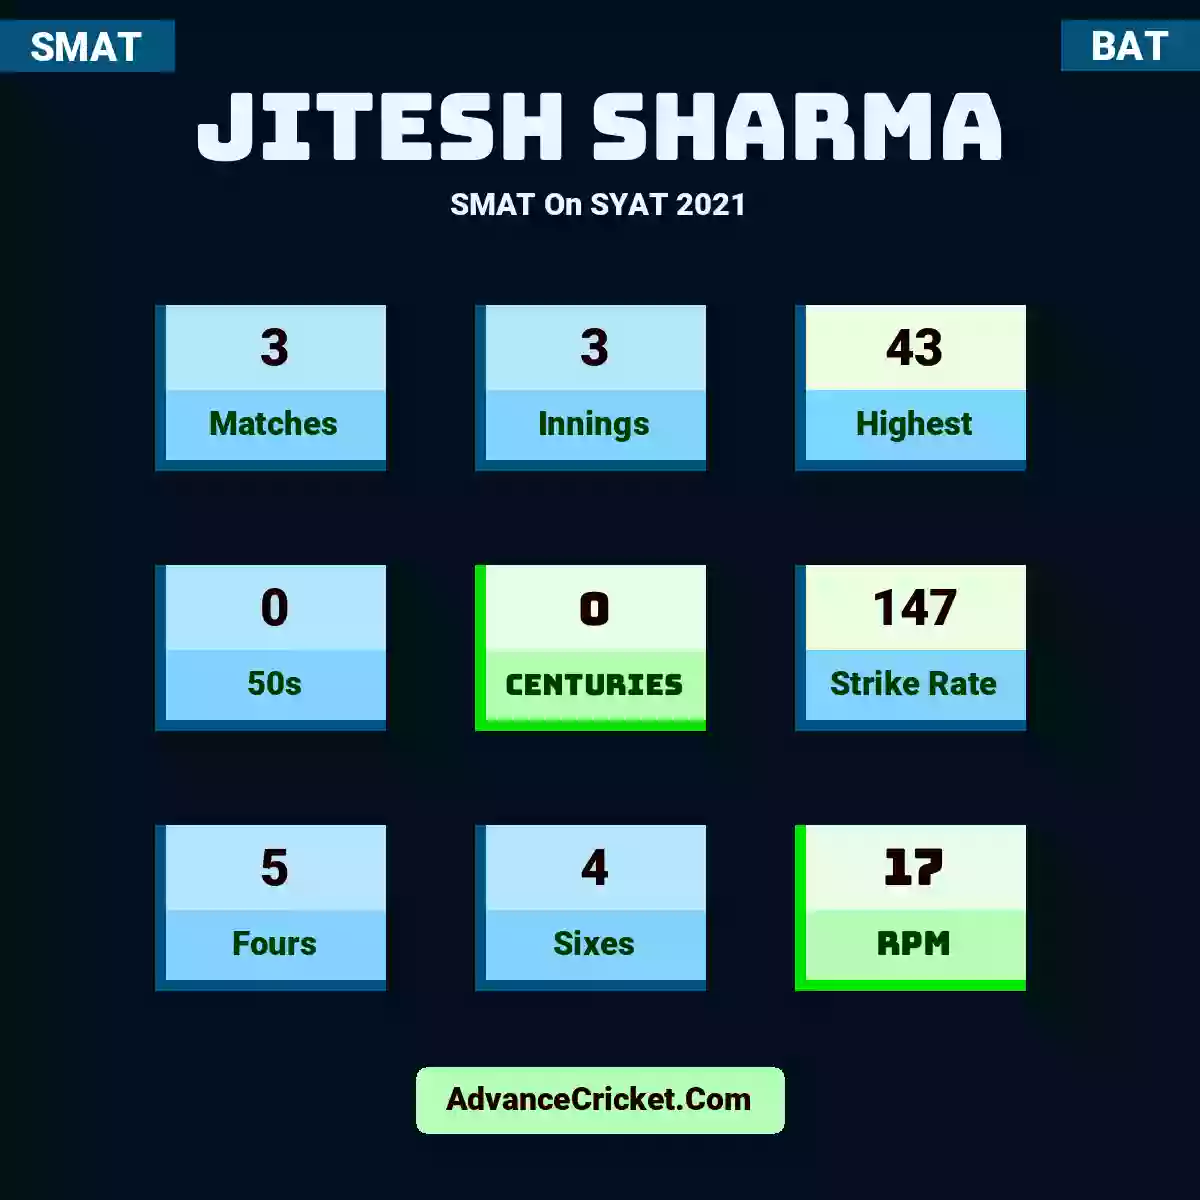 Jitesh Sharma SMAT  On SYAT 2021, Jitesh Sharma played 3 matches, scored 43 runs as highest, 0 half-centuries, and 0 centuries, with a strike rate of 147. J.Sharma hit 5 fours and 4 sixes, with an RPM of 17.